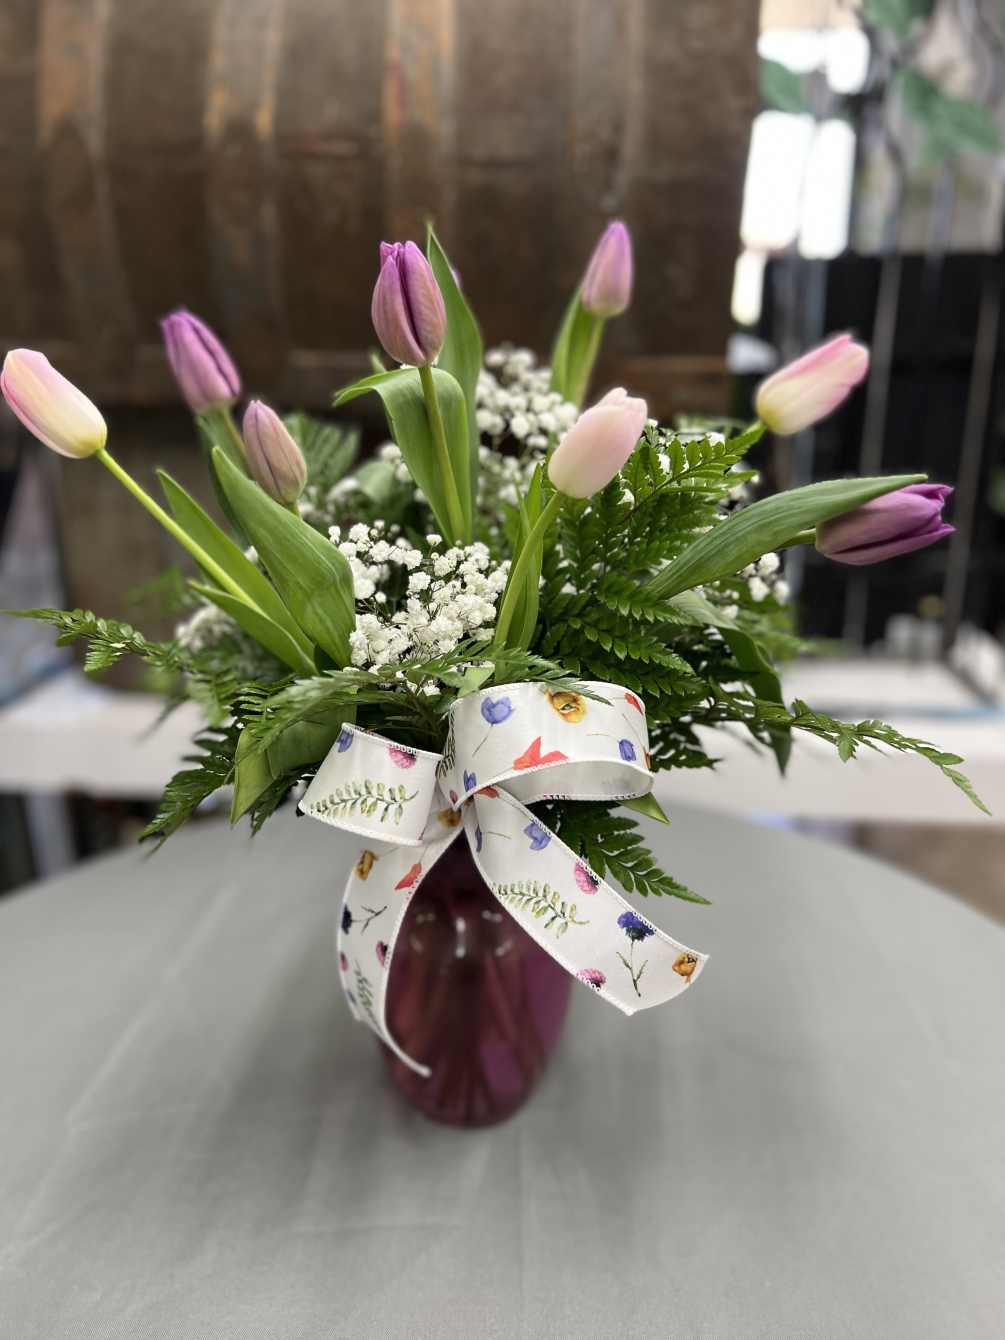 Beautiful tulips with greenery and filler in a beautiful  vase or